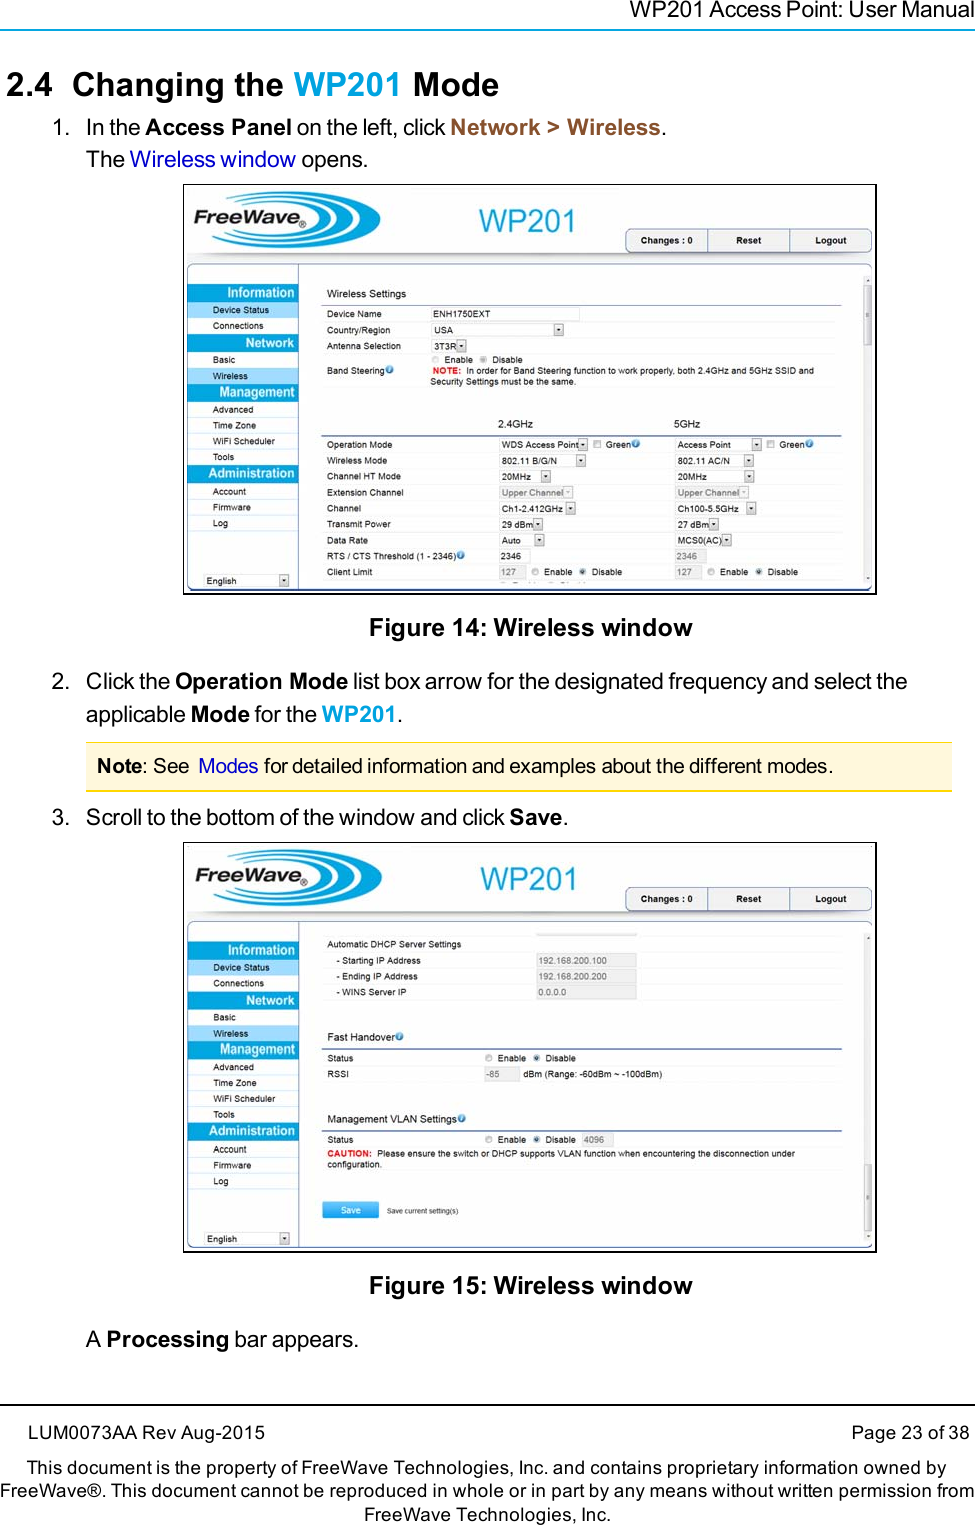 WP201 Access Point: User Manual2.4 Changing the WP201 Mode1. In the Access Panel on the left, click Network &gt; Wireless.The Wireless window opens.Figure 14: Wireless window2. Click the Operation Mode list box arrow for the designated frequency and select theapplicable Mode for the WP201.Note: See Modes for detailed information and examples about the different modes.3. Scroll to the bottom of the window and click Save.Figure 15: Wireless windowAProcessing bar appears.LUM0073AA Rev Aug-2015 Page 23 of 38This document is the property of FreeWave Technologies, Inc. and contains proprietary information owned byFreeWave®. This document cannot be reproduced in whole or in part by any means without written permission fromFreeWave Technologies, Inc.